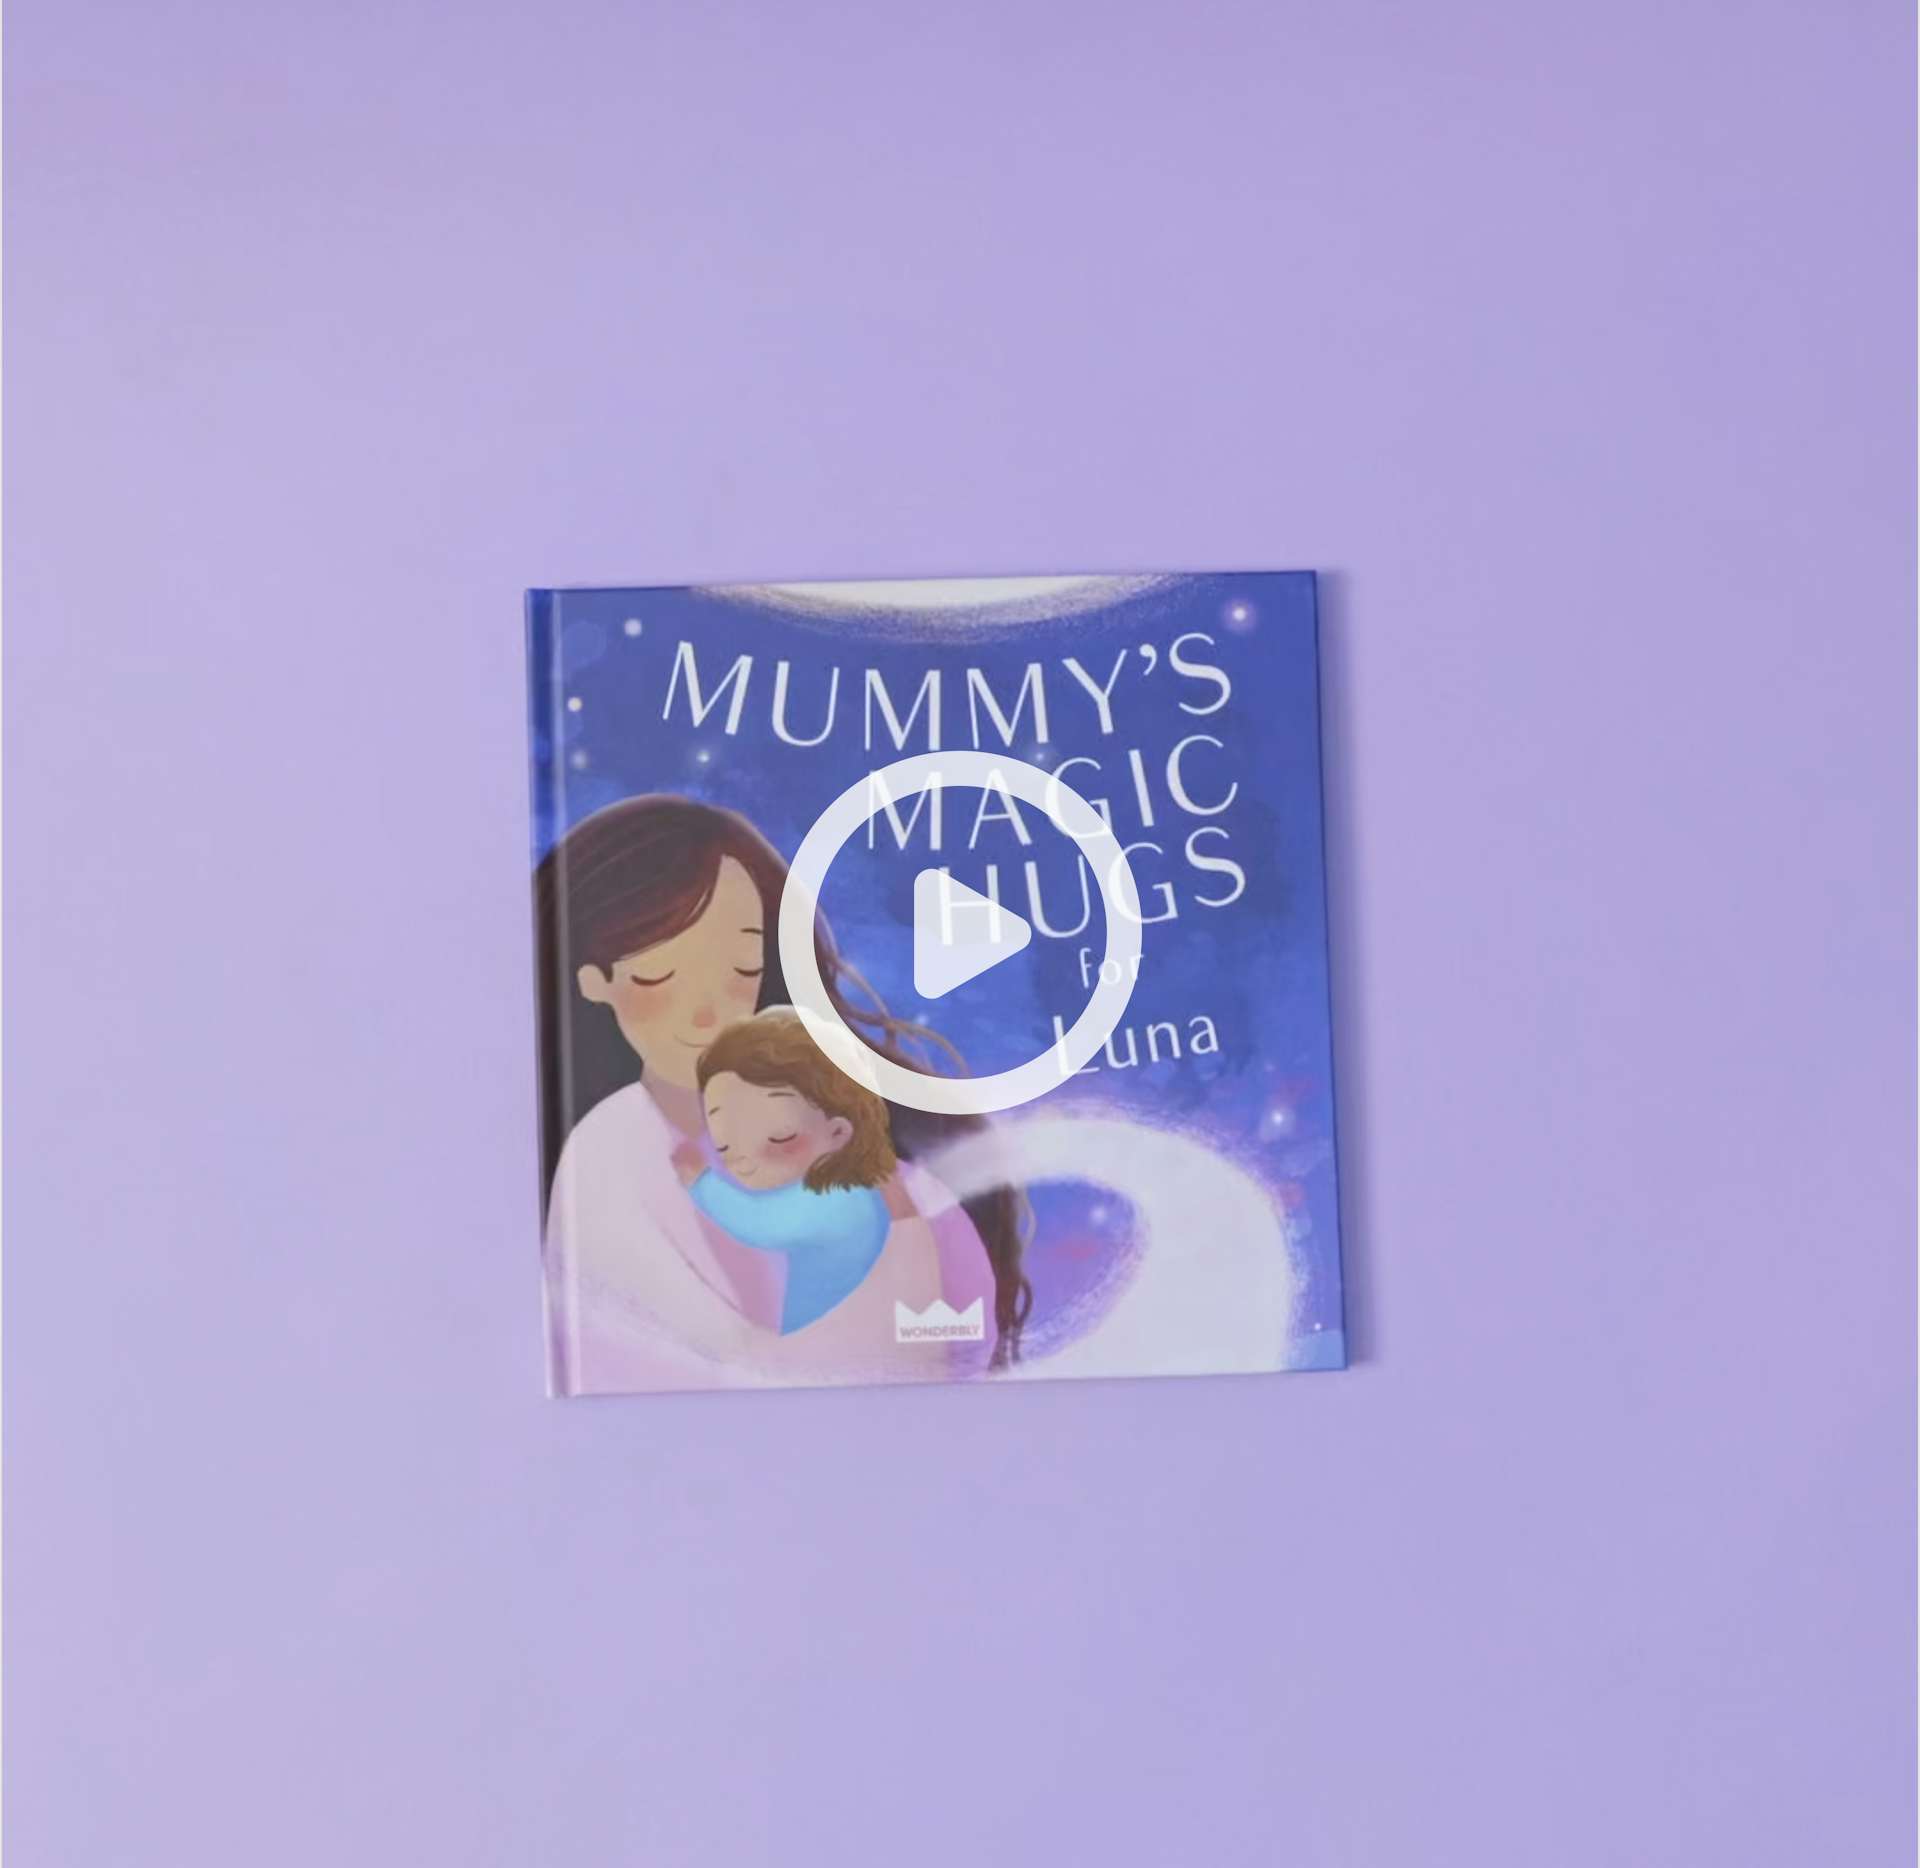 mummy's magic hugs book with 'play' icon